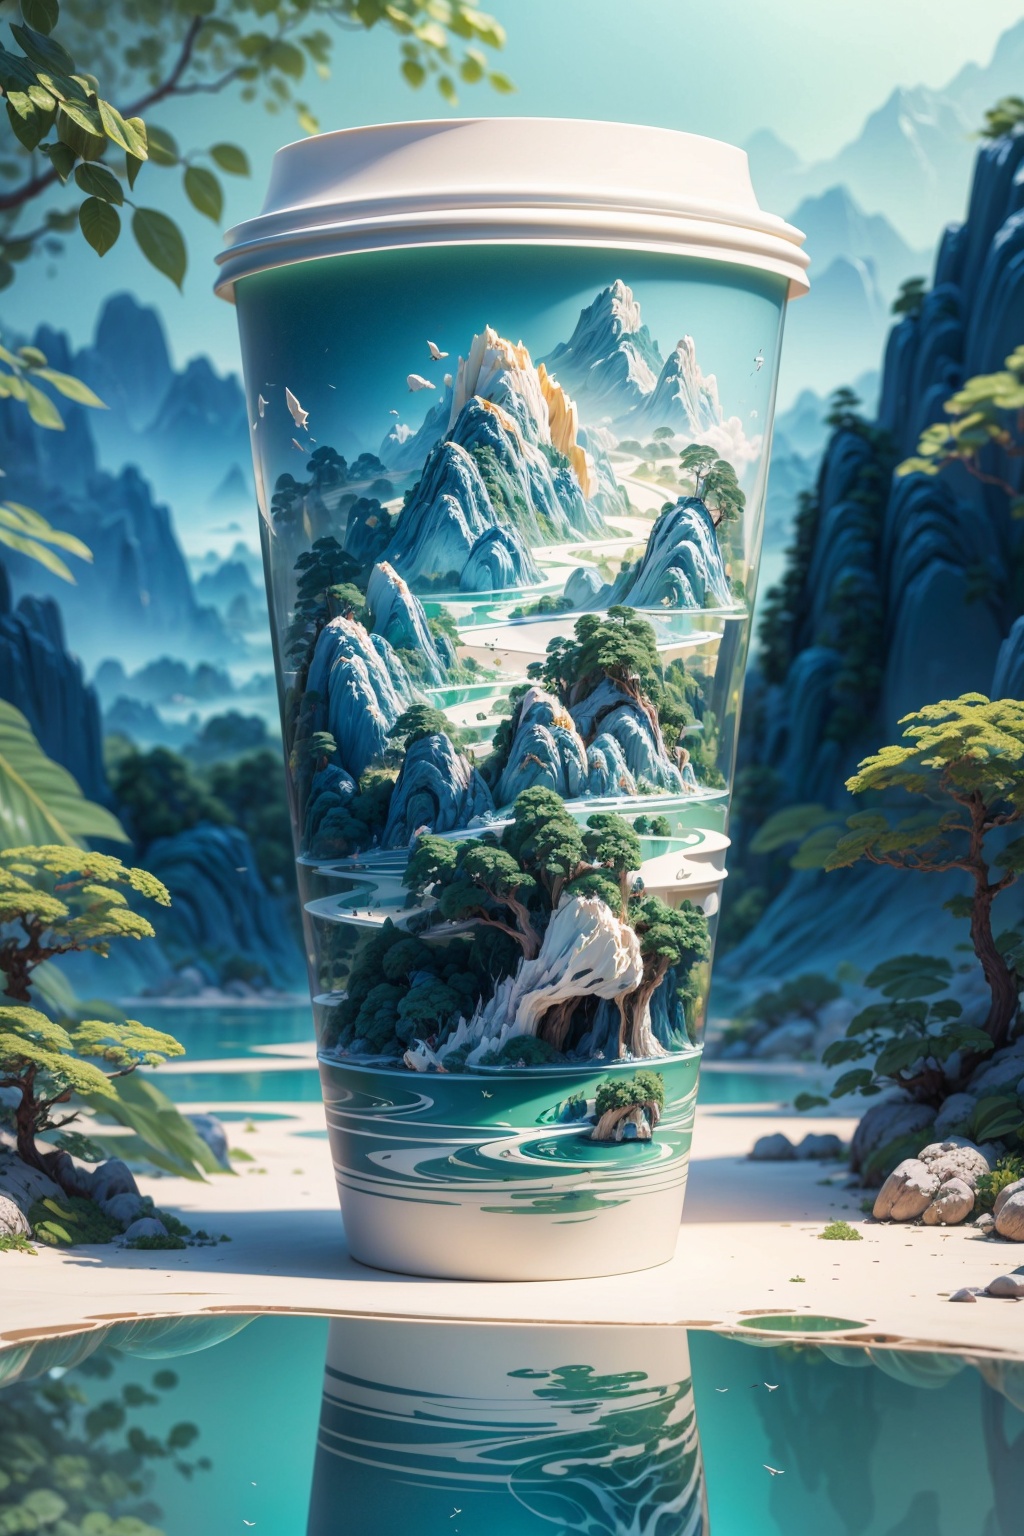 (Masterpiece, high quality, best quality, official art, beauty and aesthetics: 1.2),Paper cups surrounded by emerald landscapes, milky white transparent water, Chinese three-dimensional landscape painting, Chinese Song Dynasty landscape painting, blue theme, surrealist dream style, cream organic fluid, light tracing, foreground occlusion, natural light, jungle, c4d, OC rendering, product photography